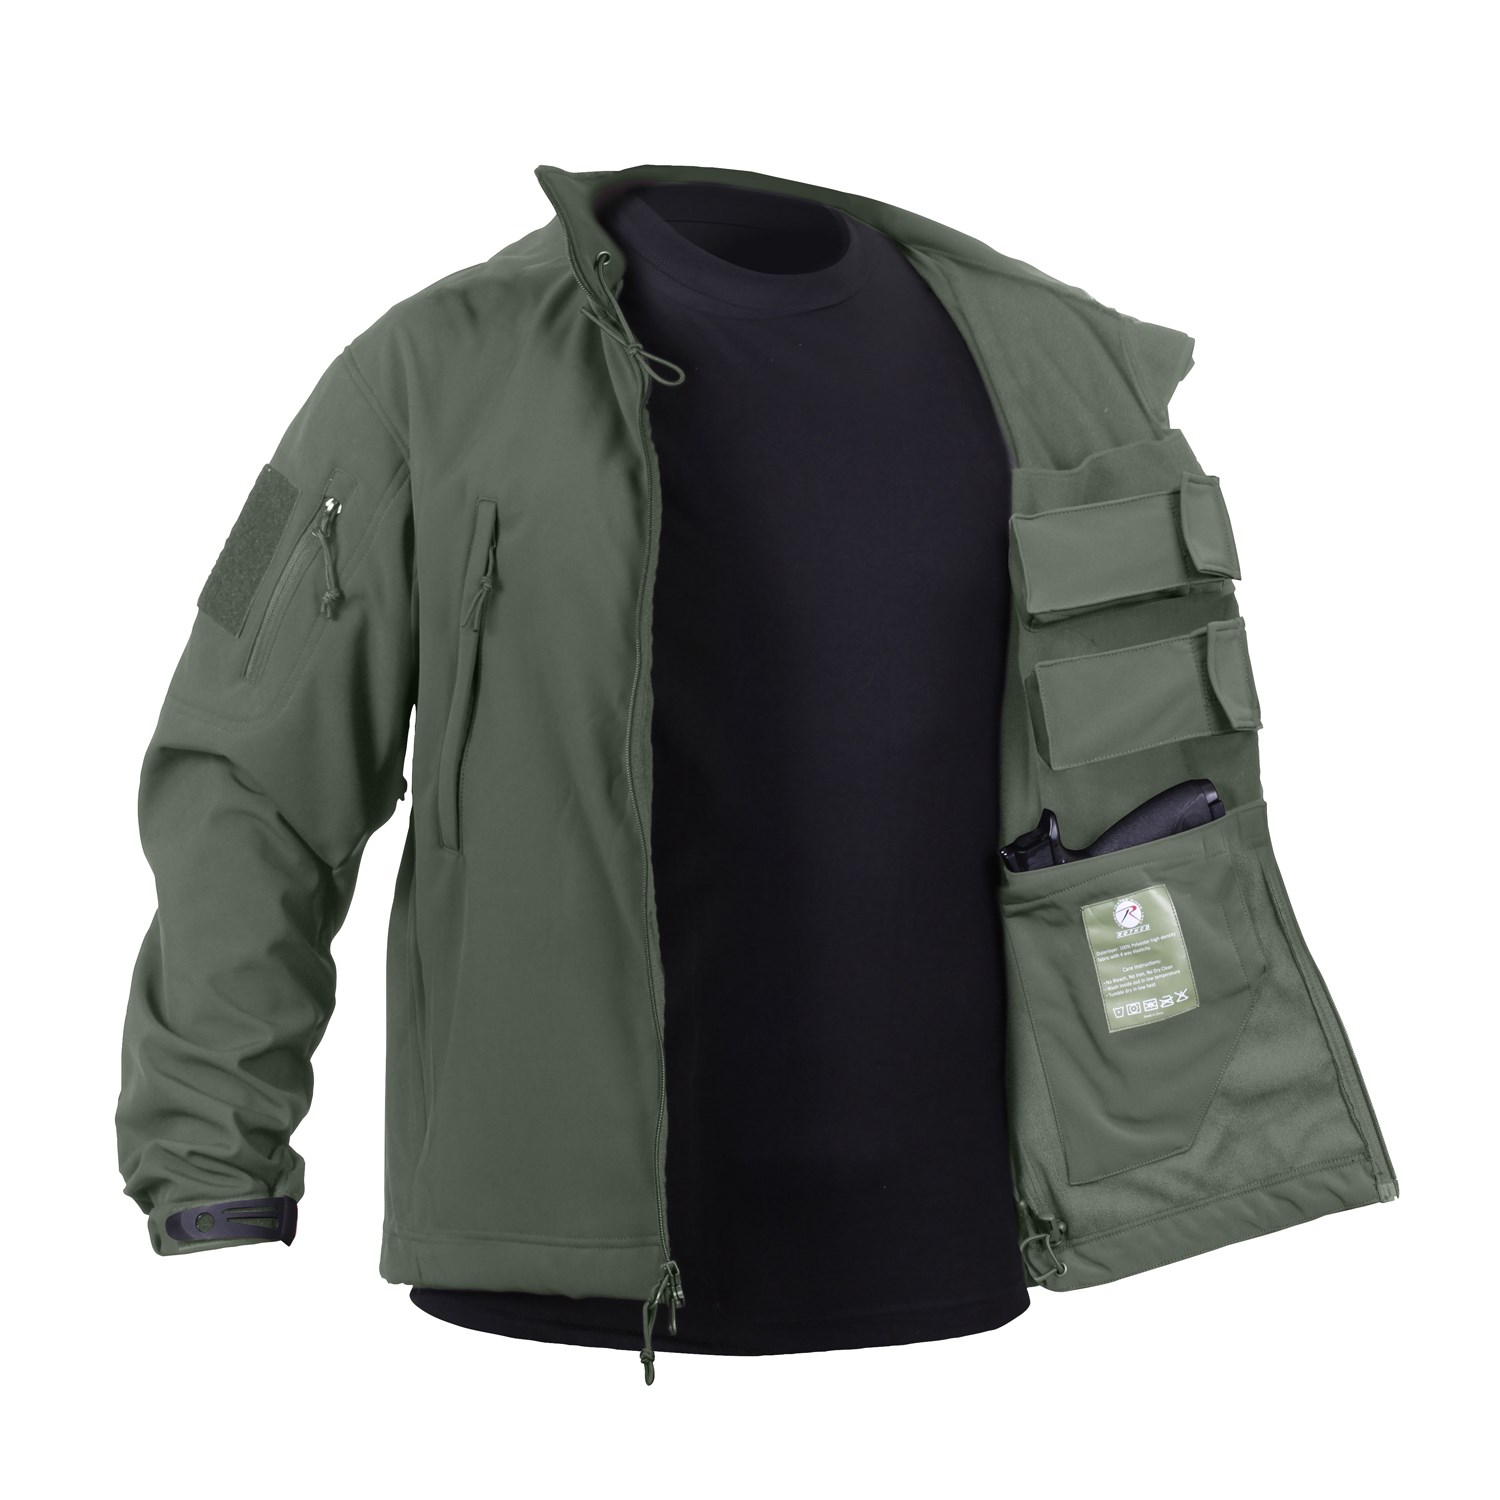 Concealed Carry Soft Shell Jacket OLIVE DRAB ROTHCO 55585 L-11